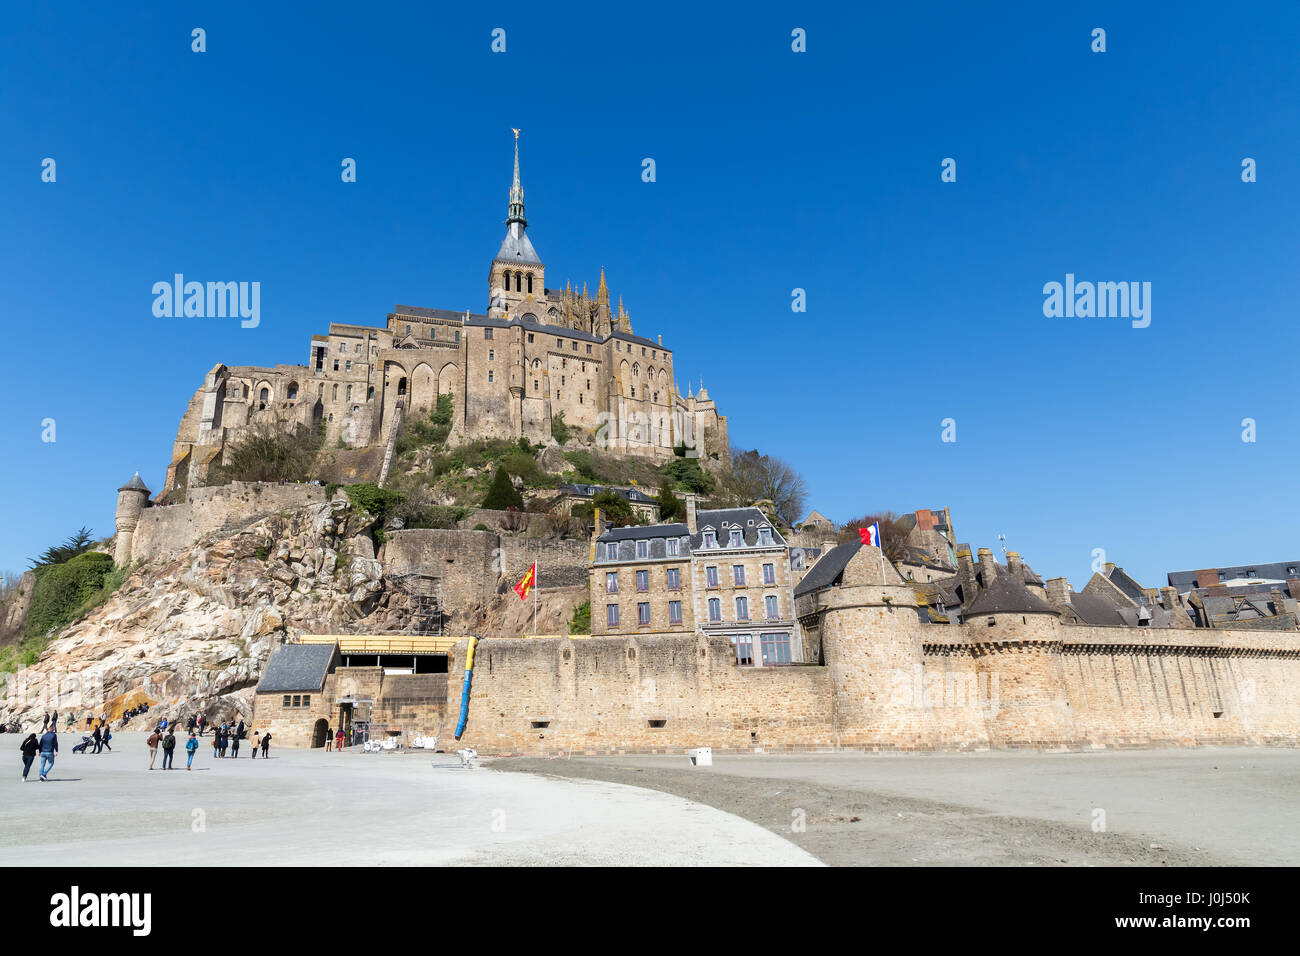 Panoramic view of famous Le Mont Saint-Michel tidal island and Saint-Michel Abbey in Normandy, in the department of Manche, France. Stock Photo